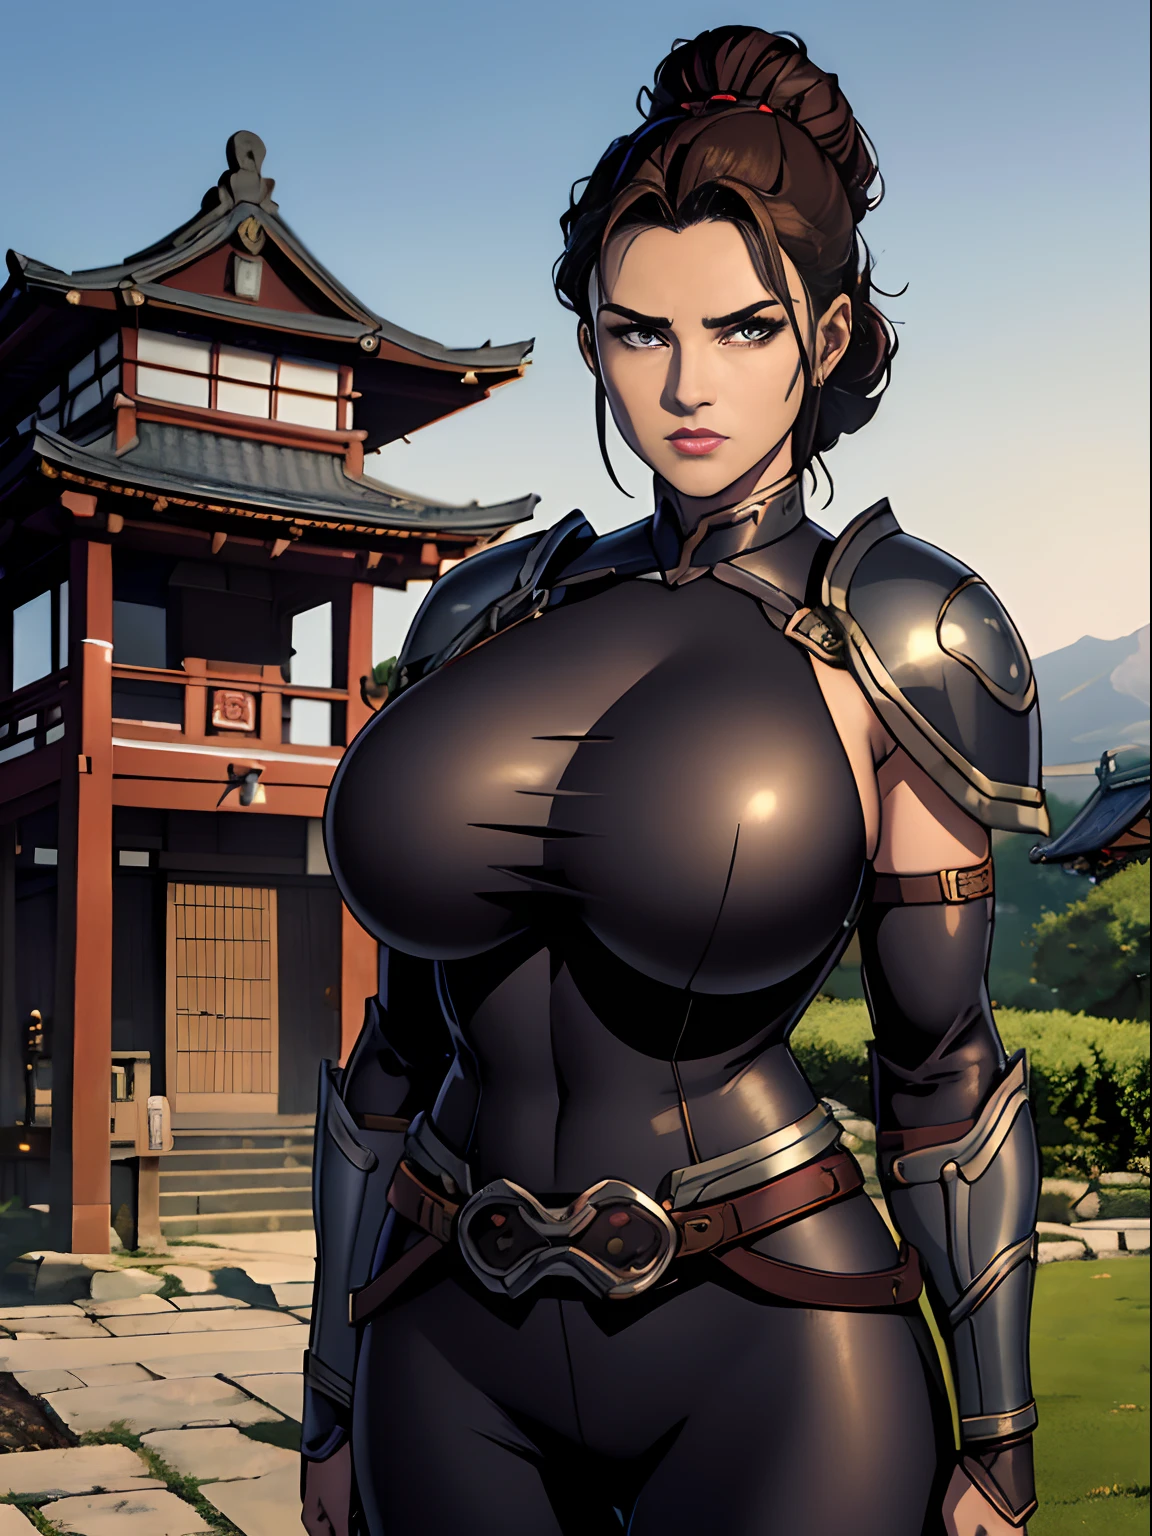 (masterpiece, top quality, best quality, official art, beautiful and aesthetic:1.2), (1girl:1.3), dark brown hair in a tight bun, extremely detailed, portrait, looking at viewer, solo, (full body:0.6), detailed background, close up, (warm summer Feudal Japan theme:1.1), samurai, charlatan, mysterious, standing in a garden, samurai armor, samurai helmet, crest, pauldrons, hip armor, breastplate, greaves, bracers, gloves, katana, banner, metal, black leather, breeches, leggings, loose pants, bracers, armor, gauntlets, boots, buckles, straps, ((((gigantic breasts)))), slim waist, slim hips, long legs, sunset, Feudal Japan, Mount Fuji, (Japanese garden exterior:1.1) background, dark mysterious lighting, shadows, magical atmosphere, dutch angle,